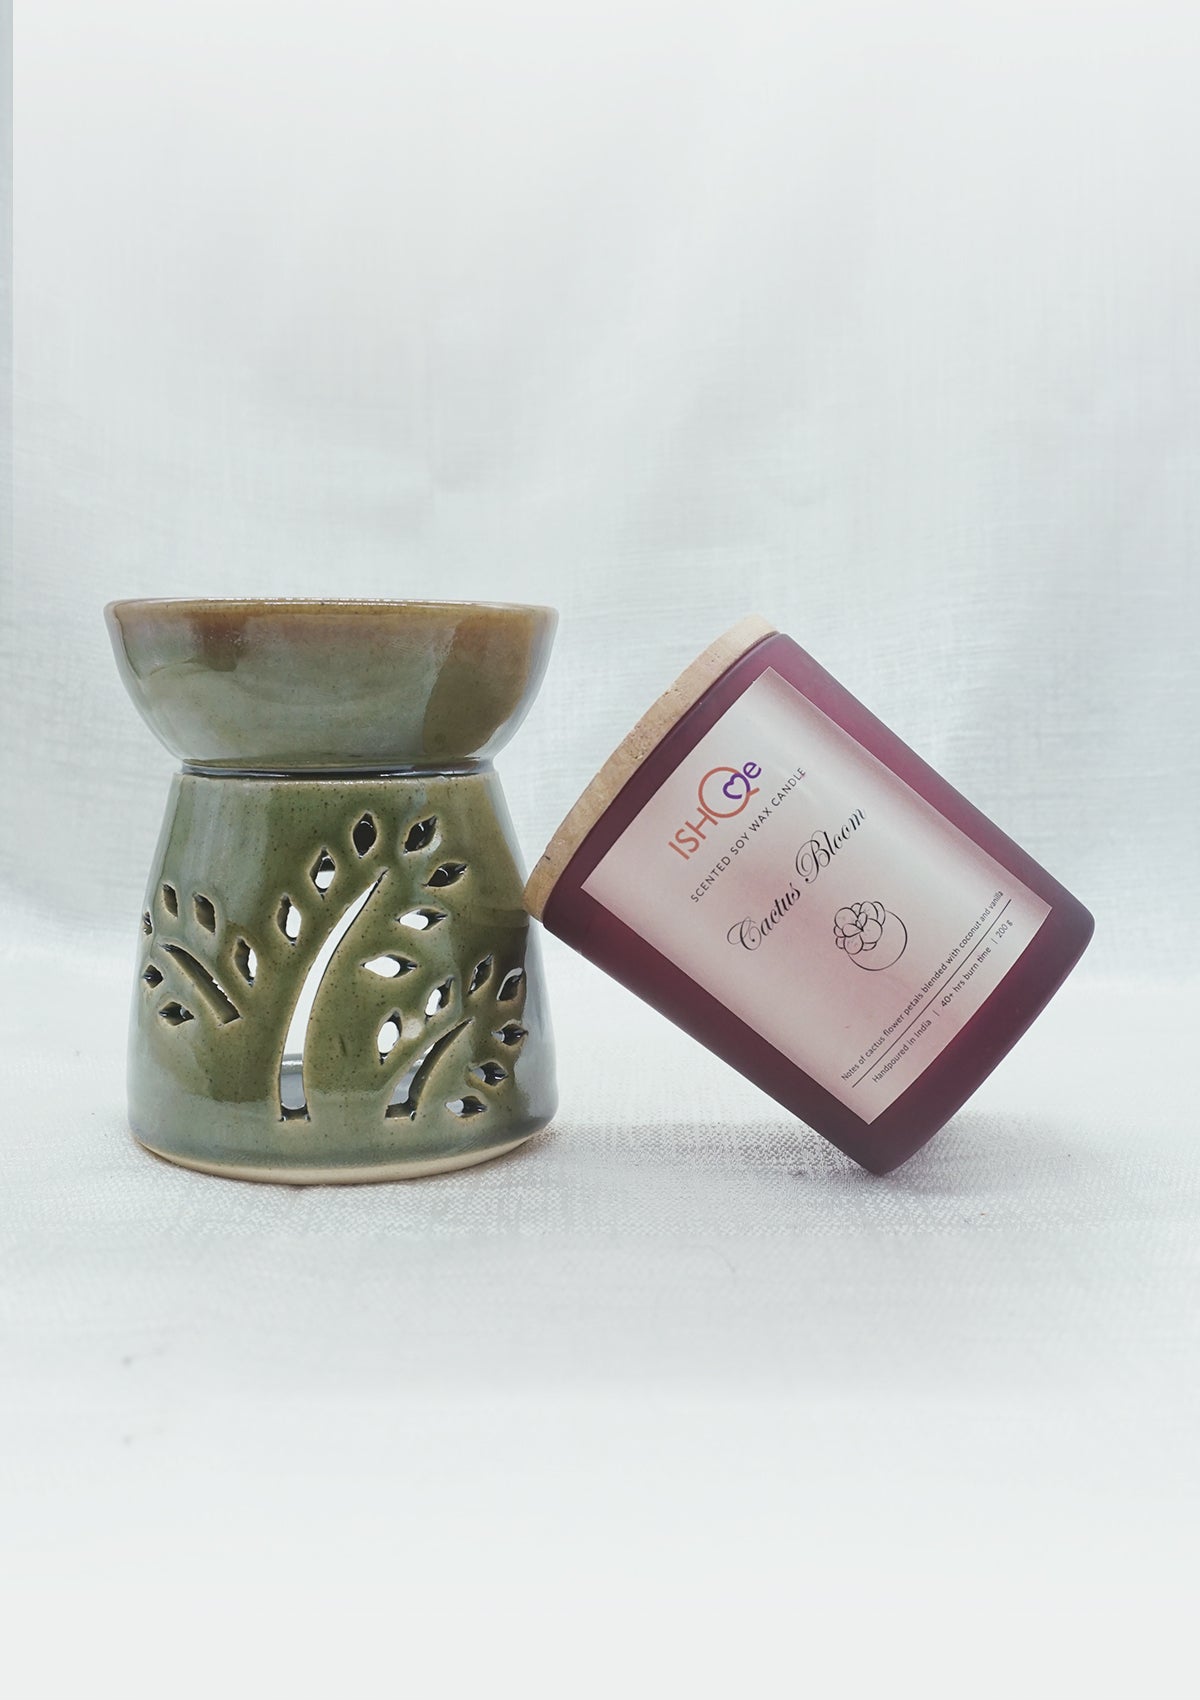 IshqME Aromatic Home Set: Olive Green Ceramic Diffuser & Cactus Bloom Candle - IshqMe